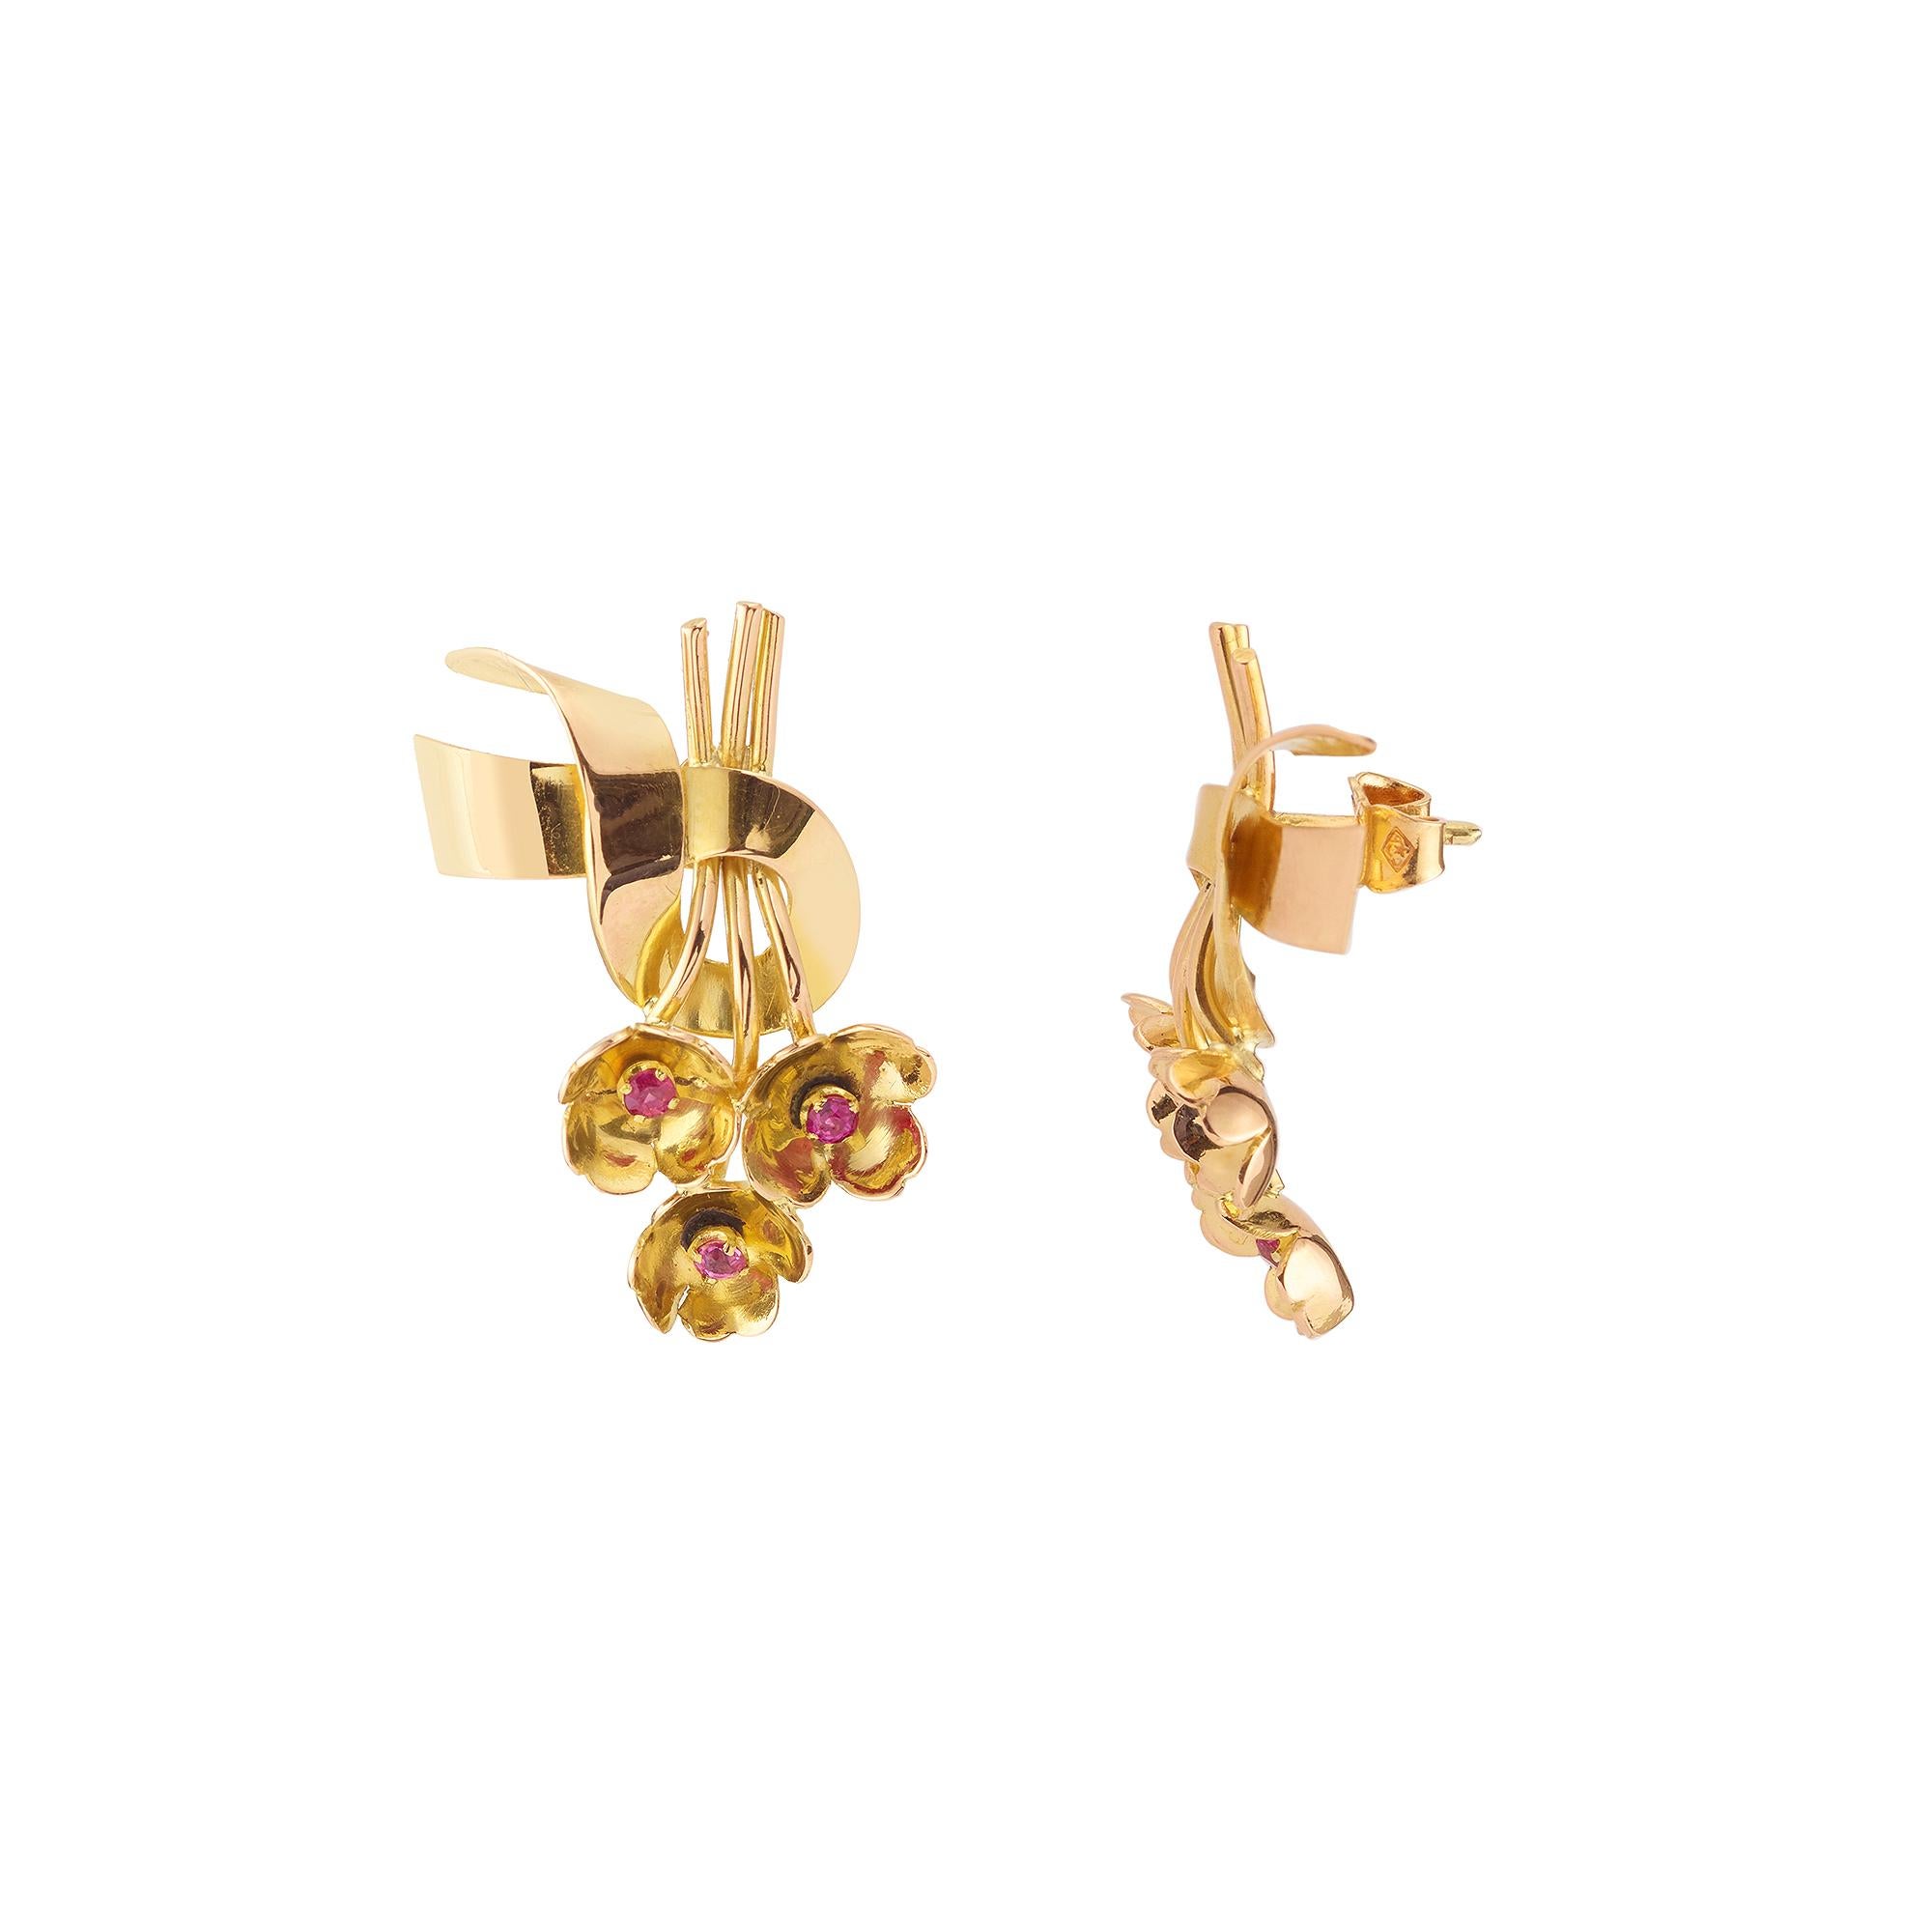 Yellow gold ribbon earrings set with small pink sapphires in the centre of a flower design. The pink sapphires are mostly natural and probably Burmese.

Poucette clasp.

Earrings size : 2.82 x 1.49 cm, (1.960 x 1.585 inch)

Weight of the earrings :